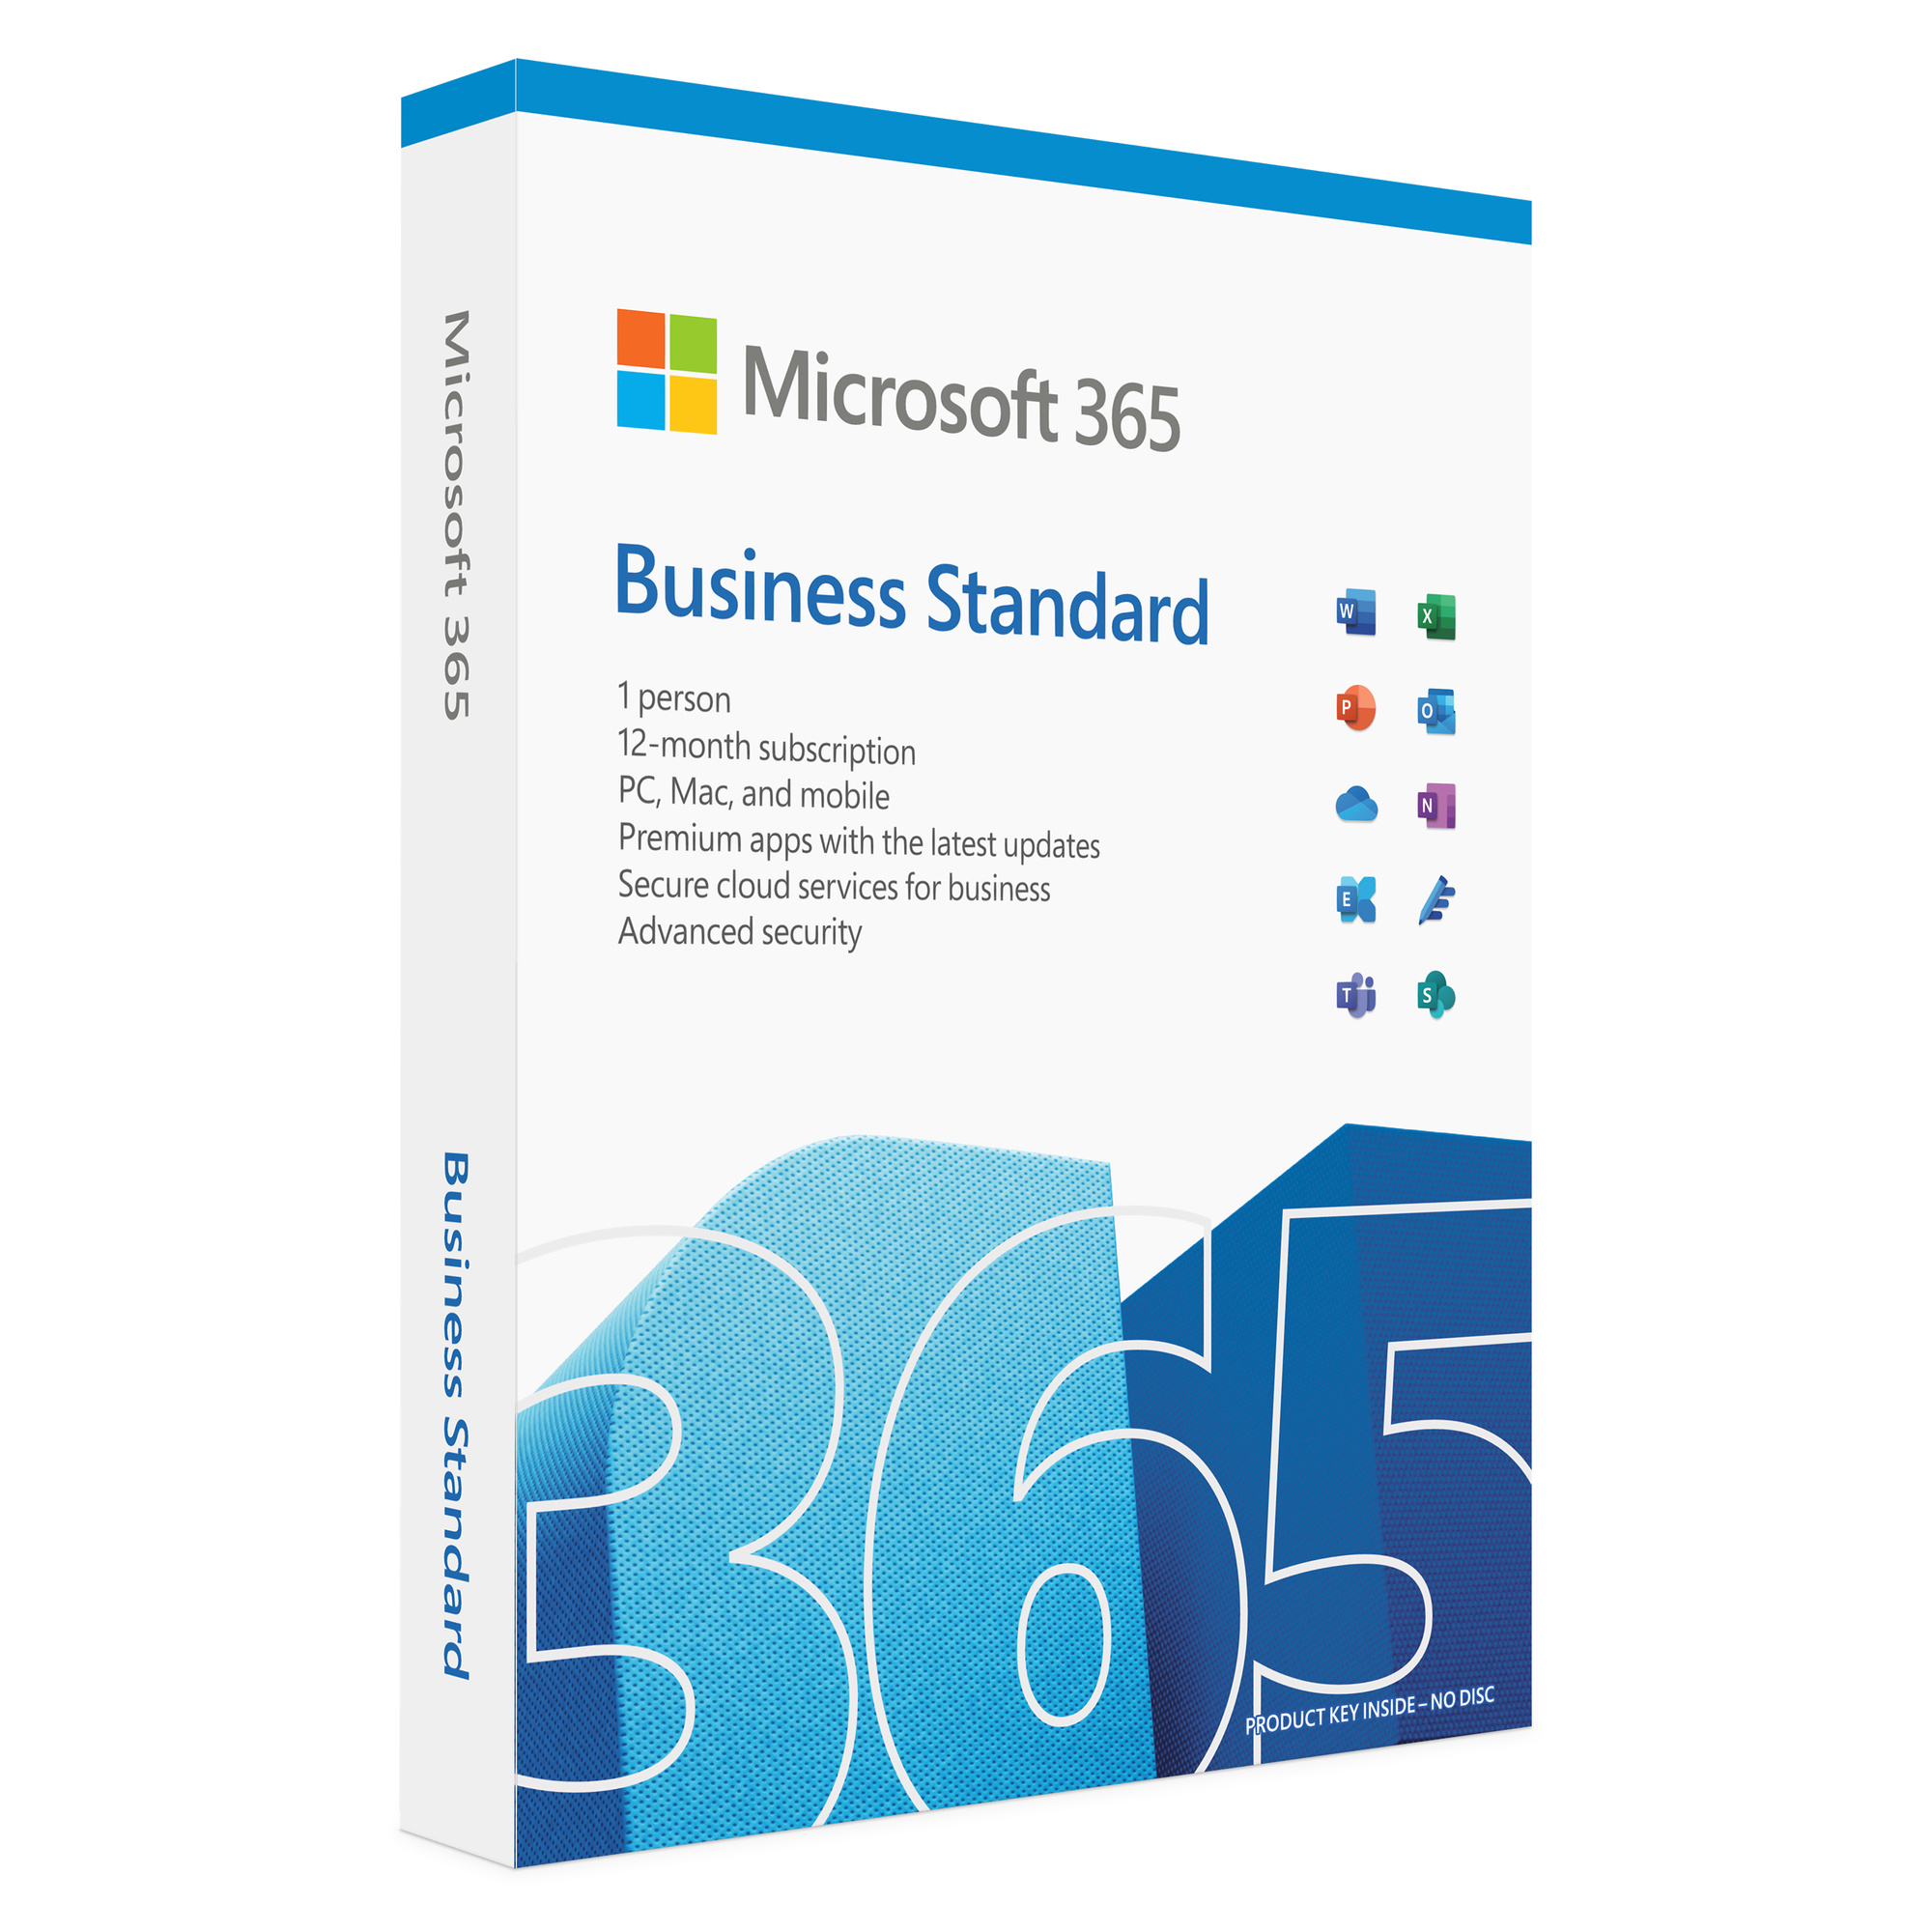 Microsoft 365 Business Standard (One-Year Subscription) in Lagos Nigeria